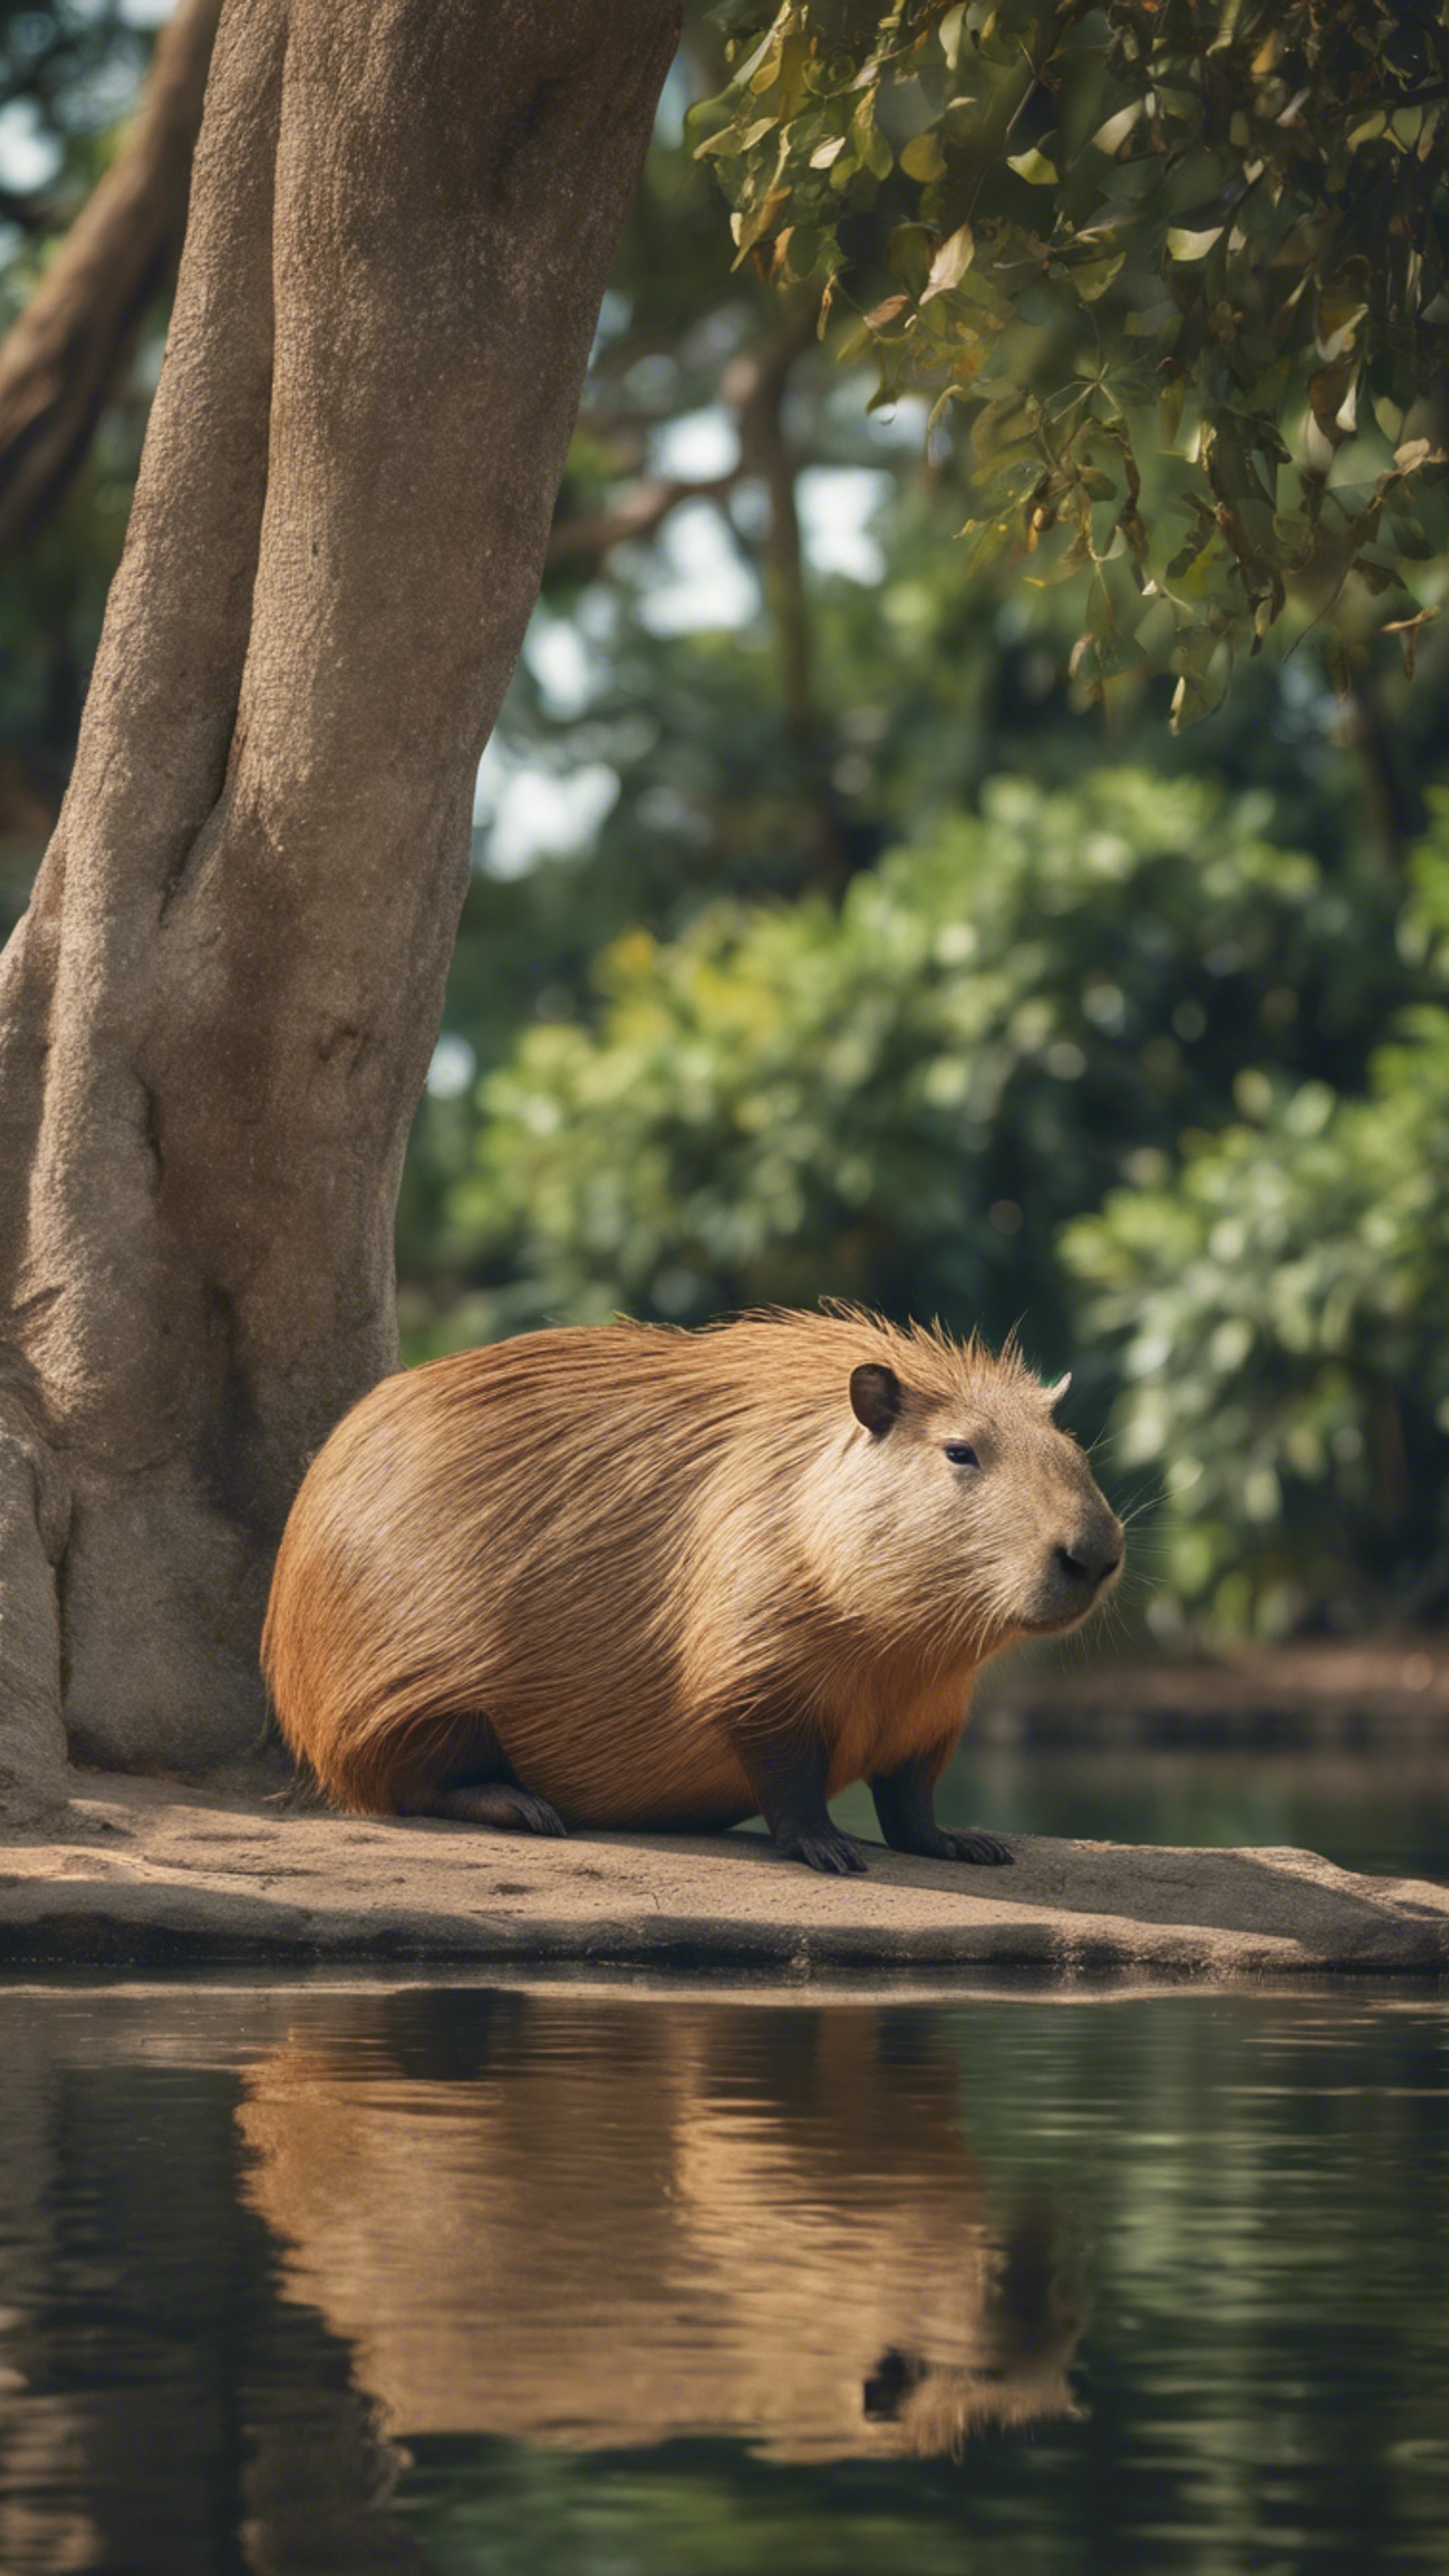 A capybara resting lazily near a tranquil water body under the shade of a giant tree.壁紙[719271a809ea443e80f6]